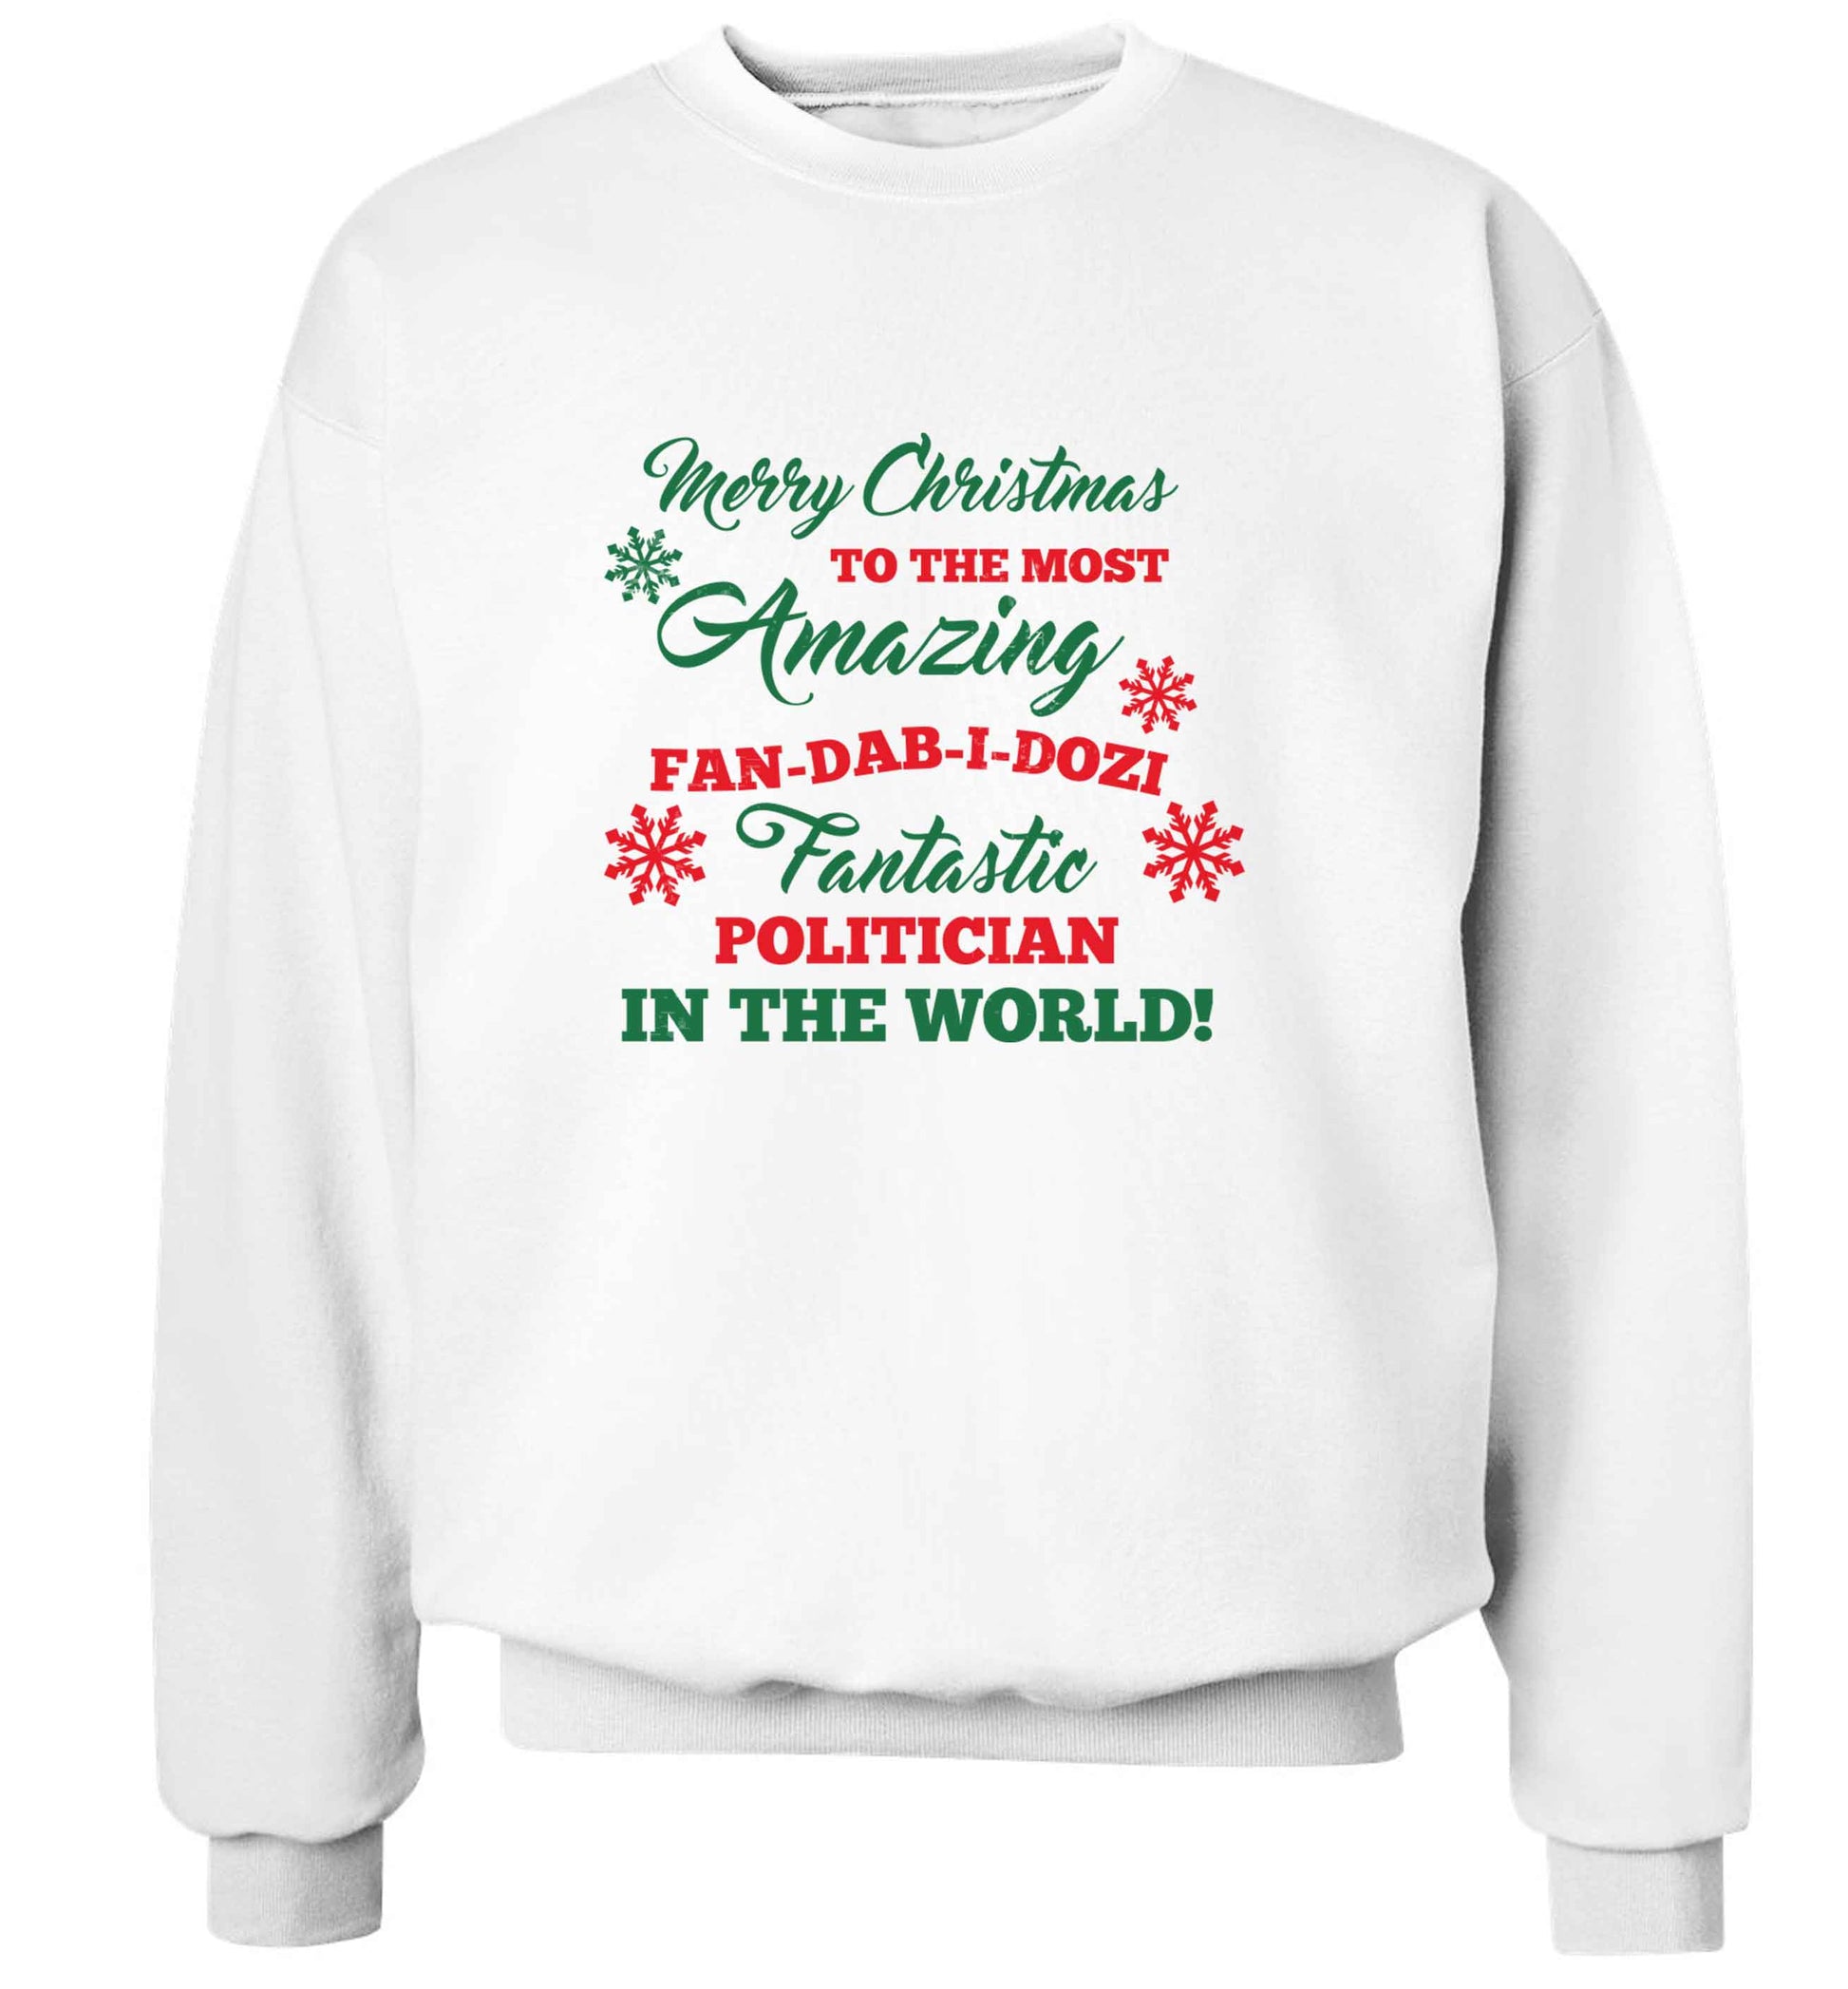 Merry Christmas to the most amazing politician in the world! adult's unisex white sweater 2XL